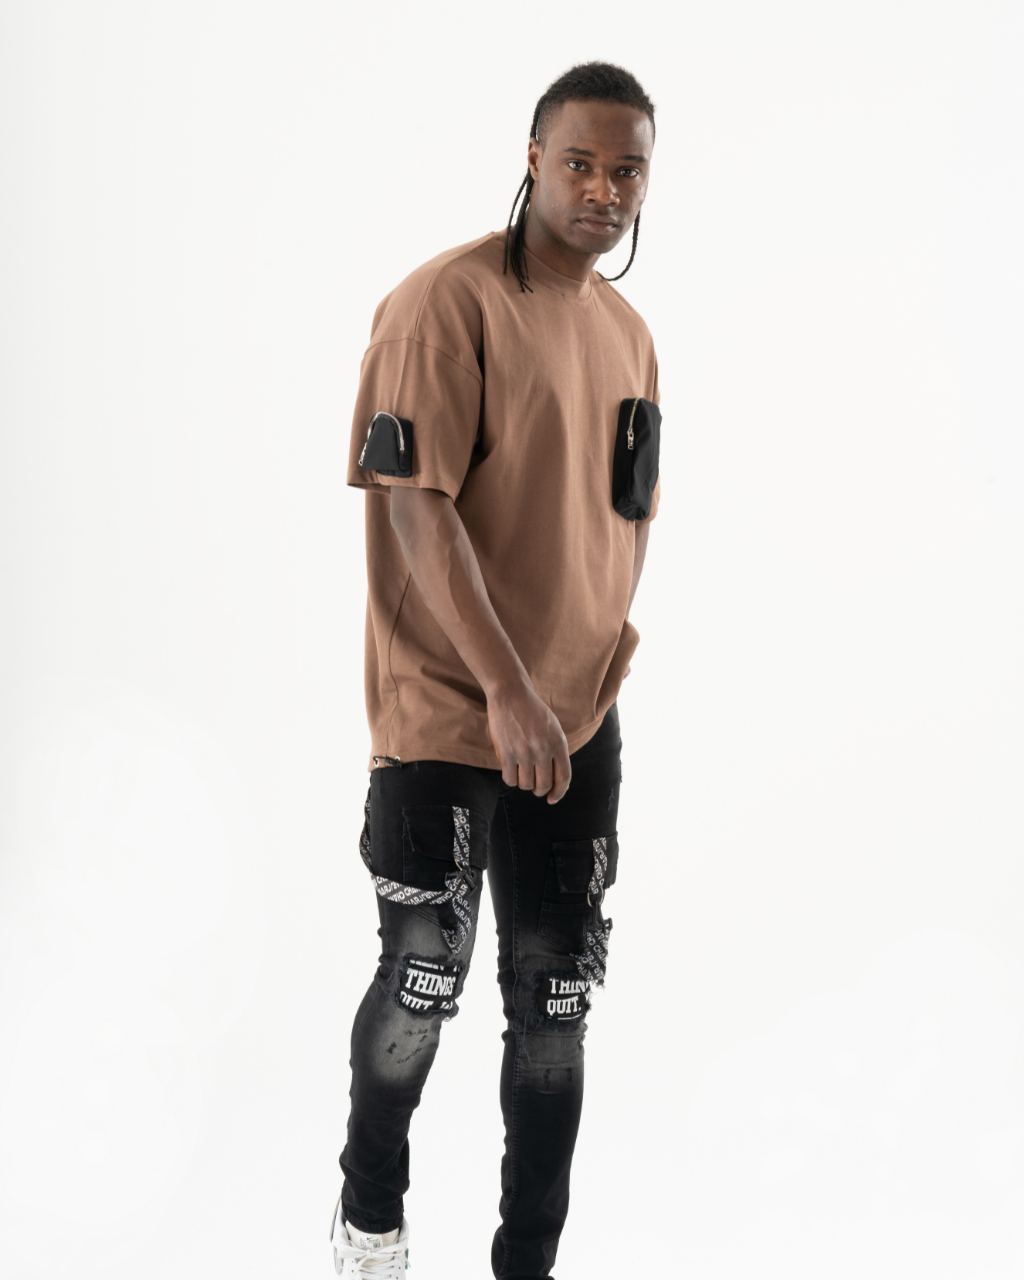 A man wearing a brown FATE t-shirt and ripped jeans.